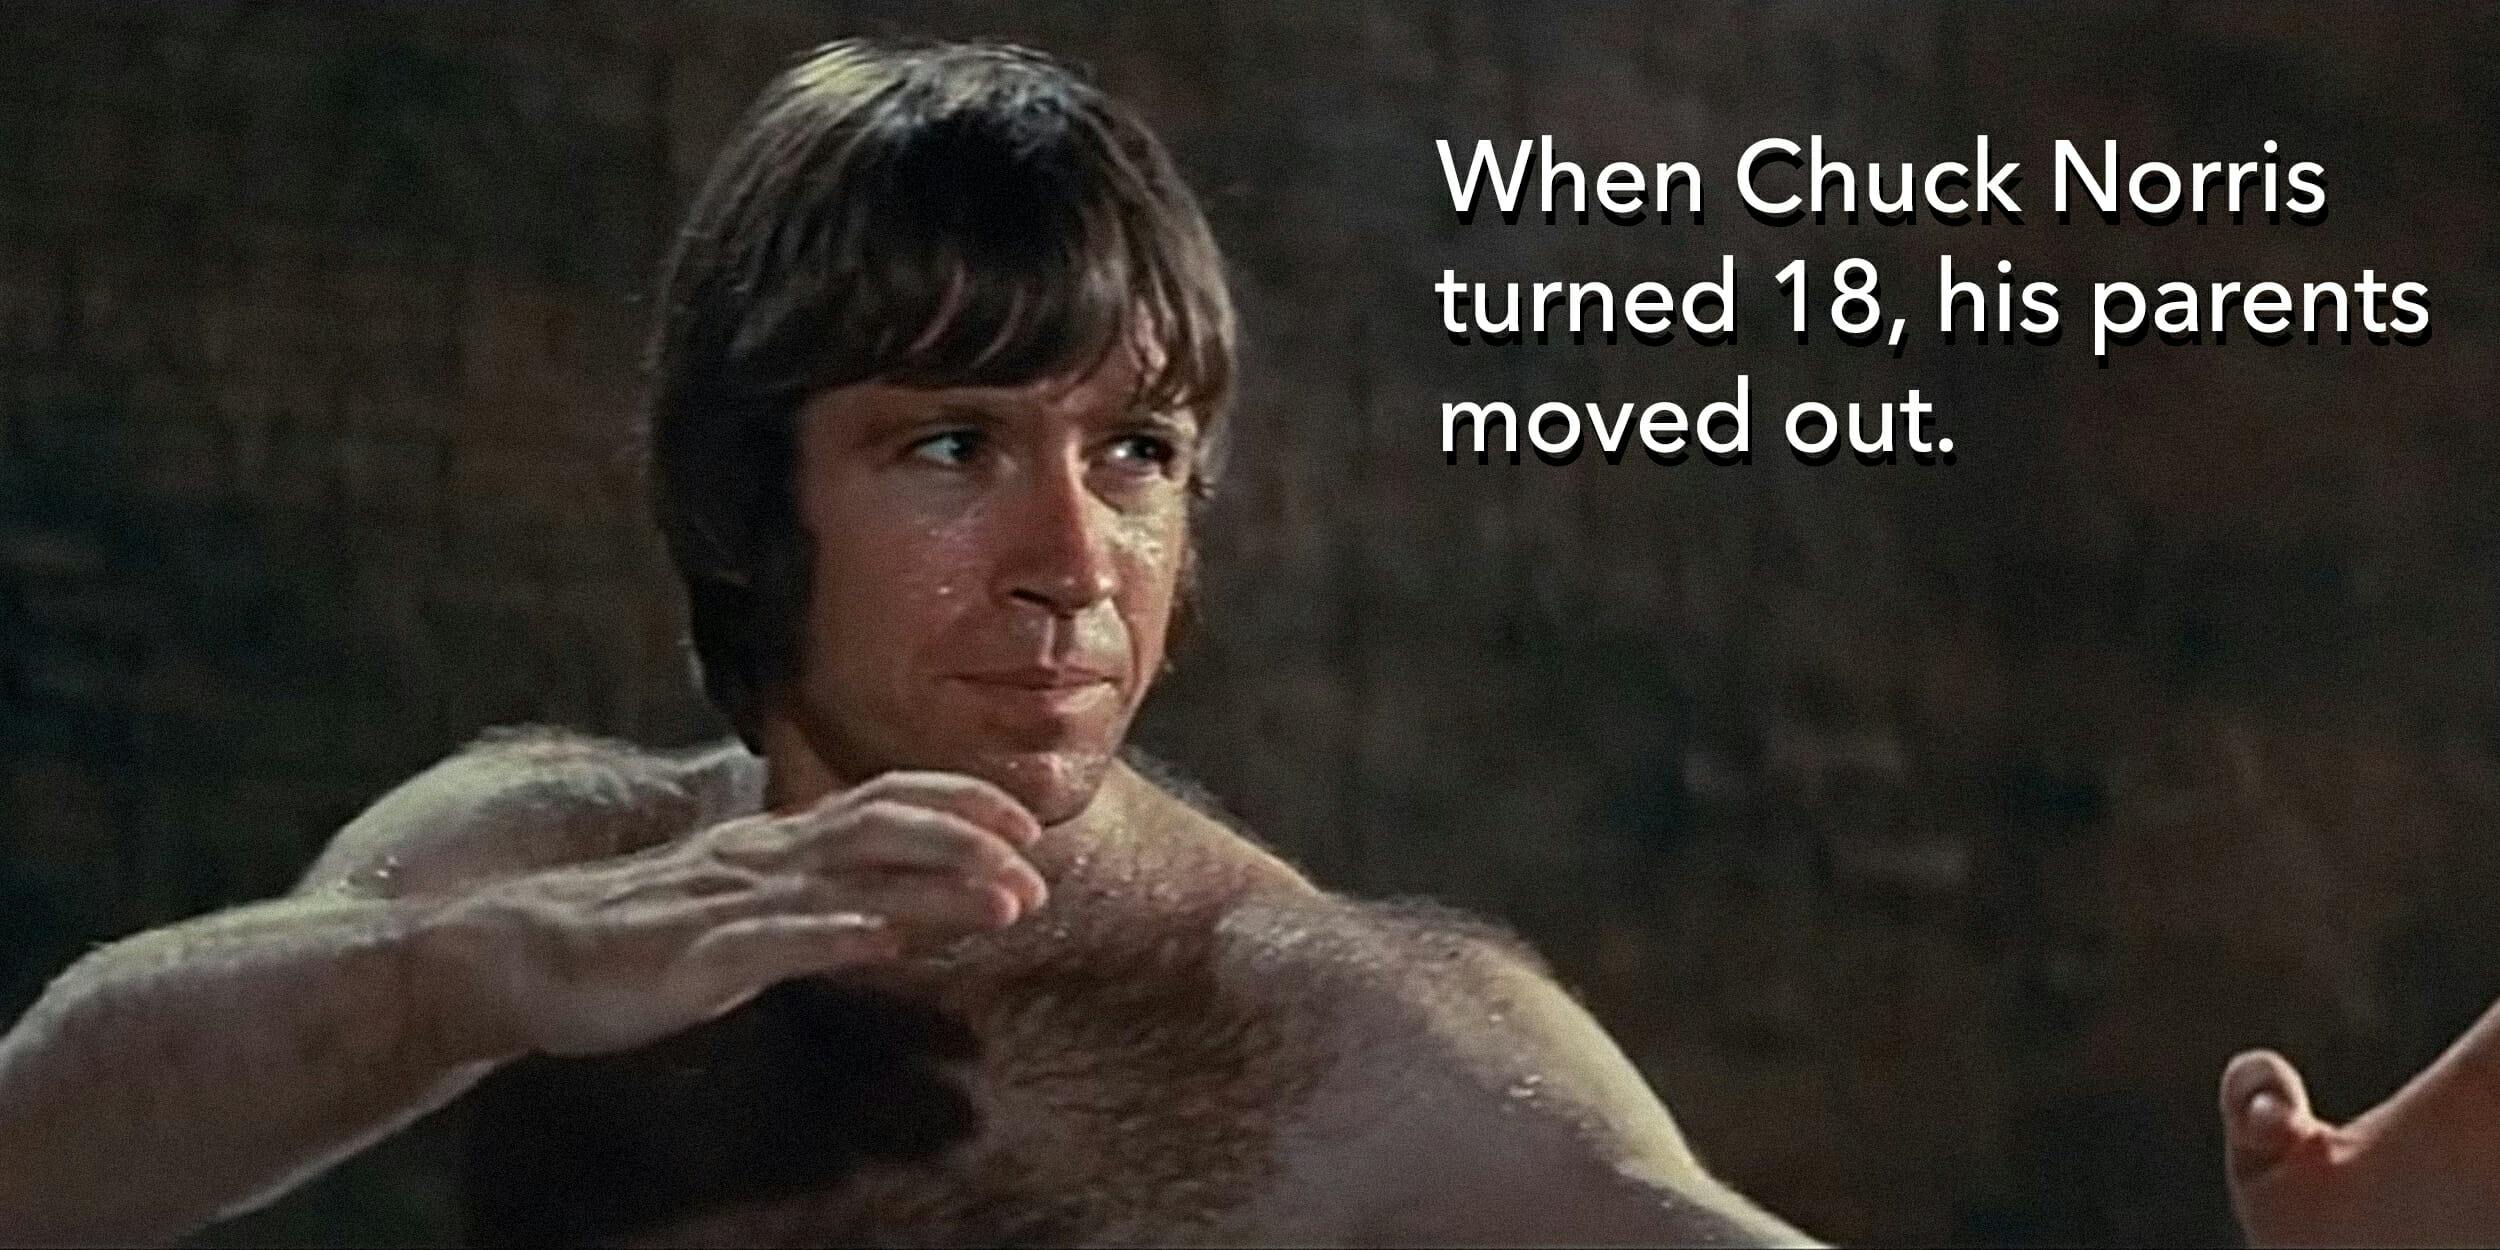 Chuck Norris Facts The Story Behind the Famous Viral Site